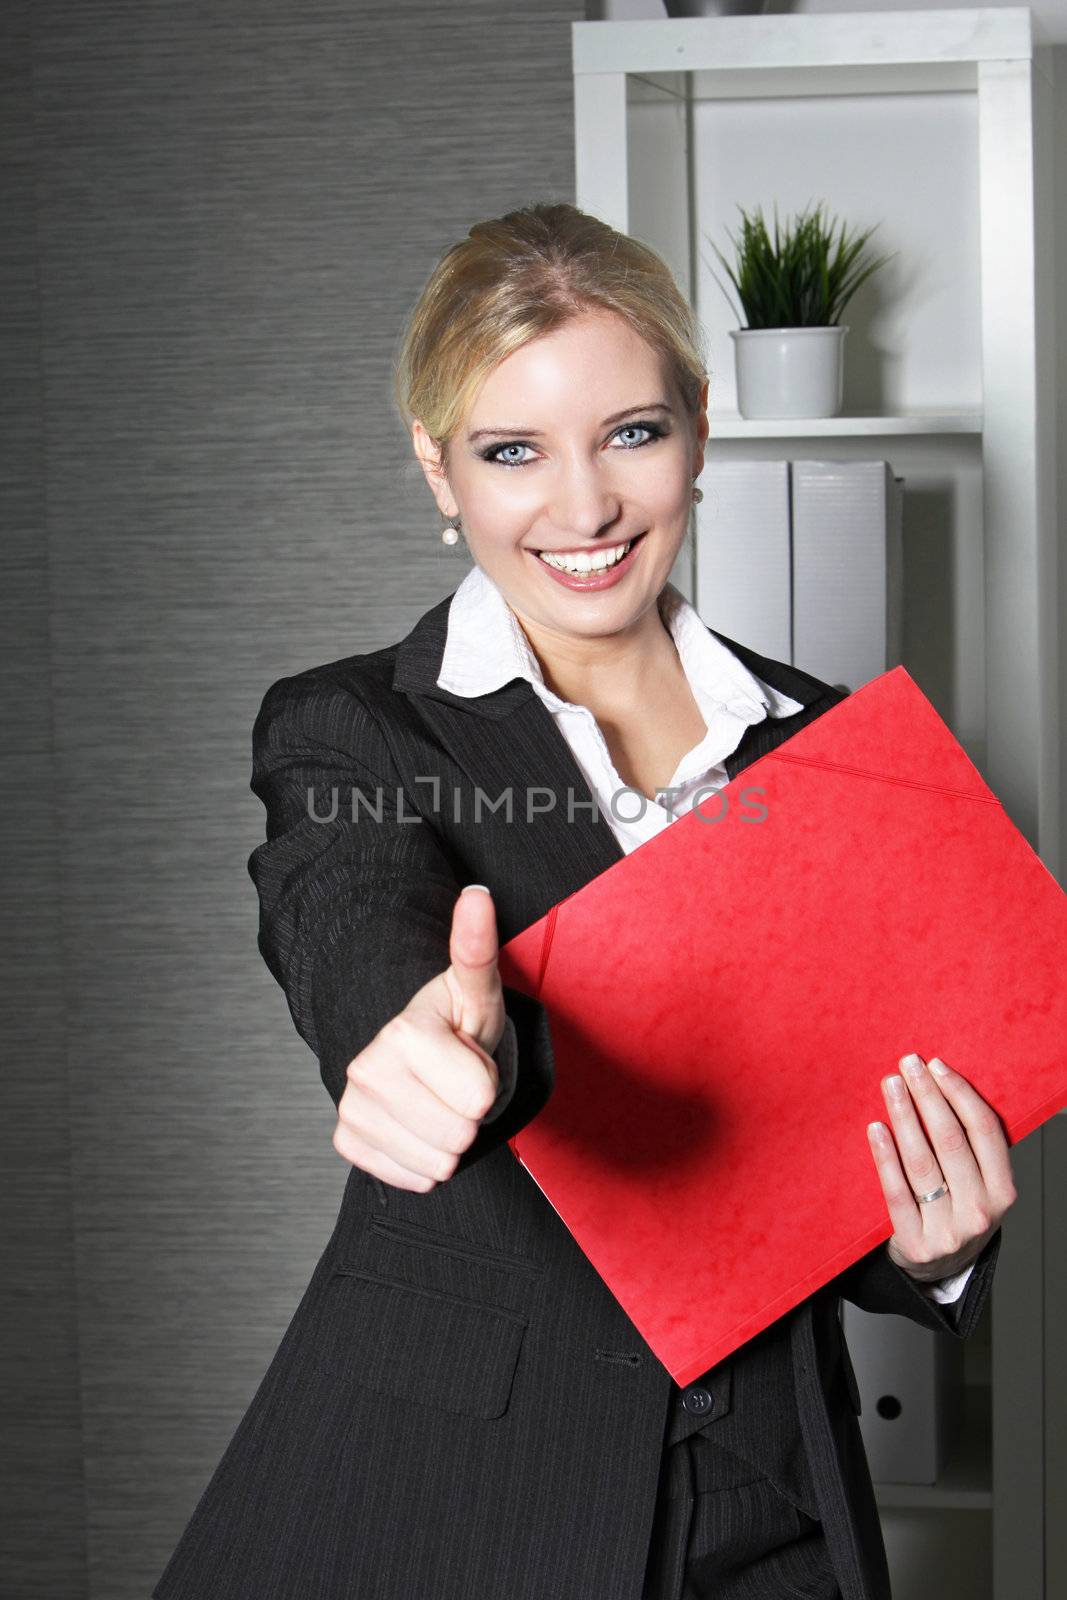 Beautiful stylish young female office worker holding a red folder giving a thumbs up gesture with a big cheerful smile